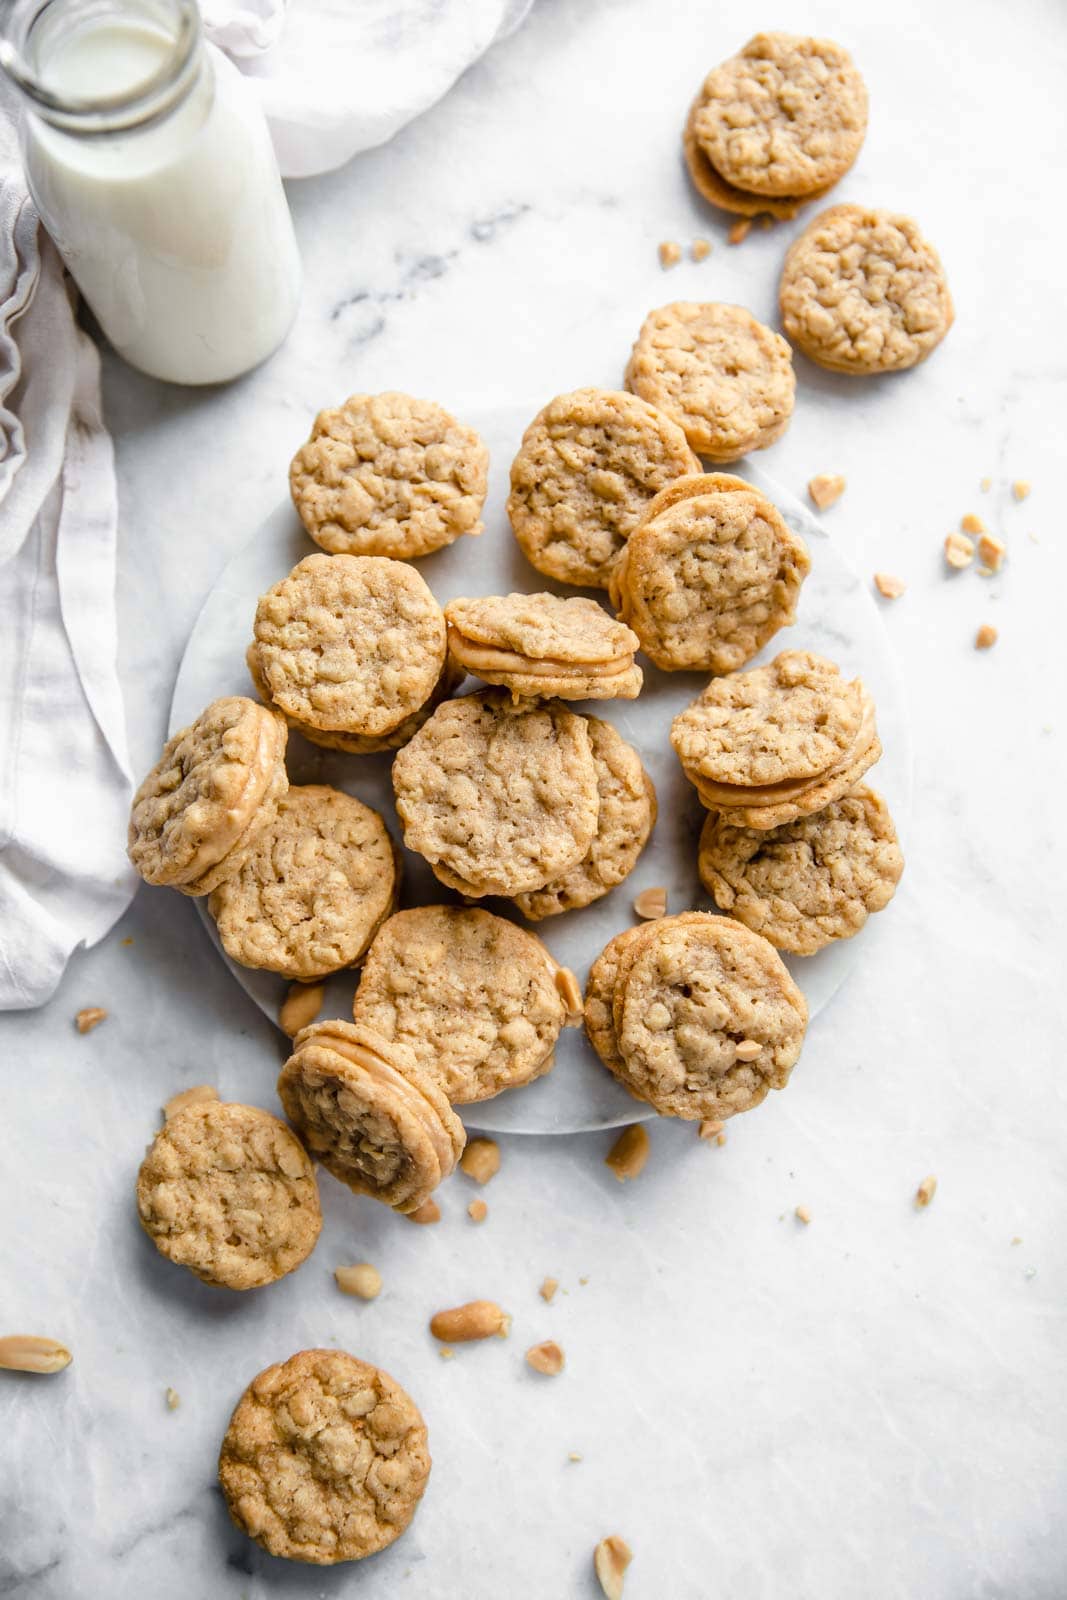 Halfway to Heaven Peanut Butter Cookies: this recipe is nearly all in halves, which makes it super easy to remember. And they're beyond heavenly!